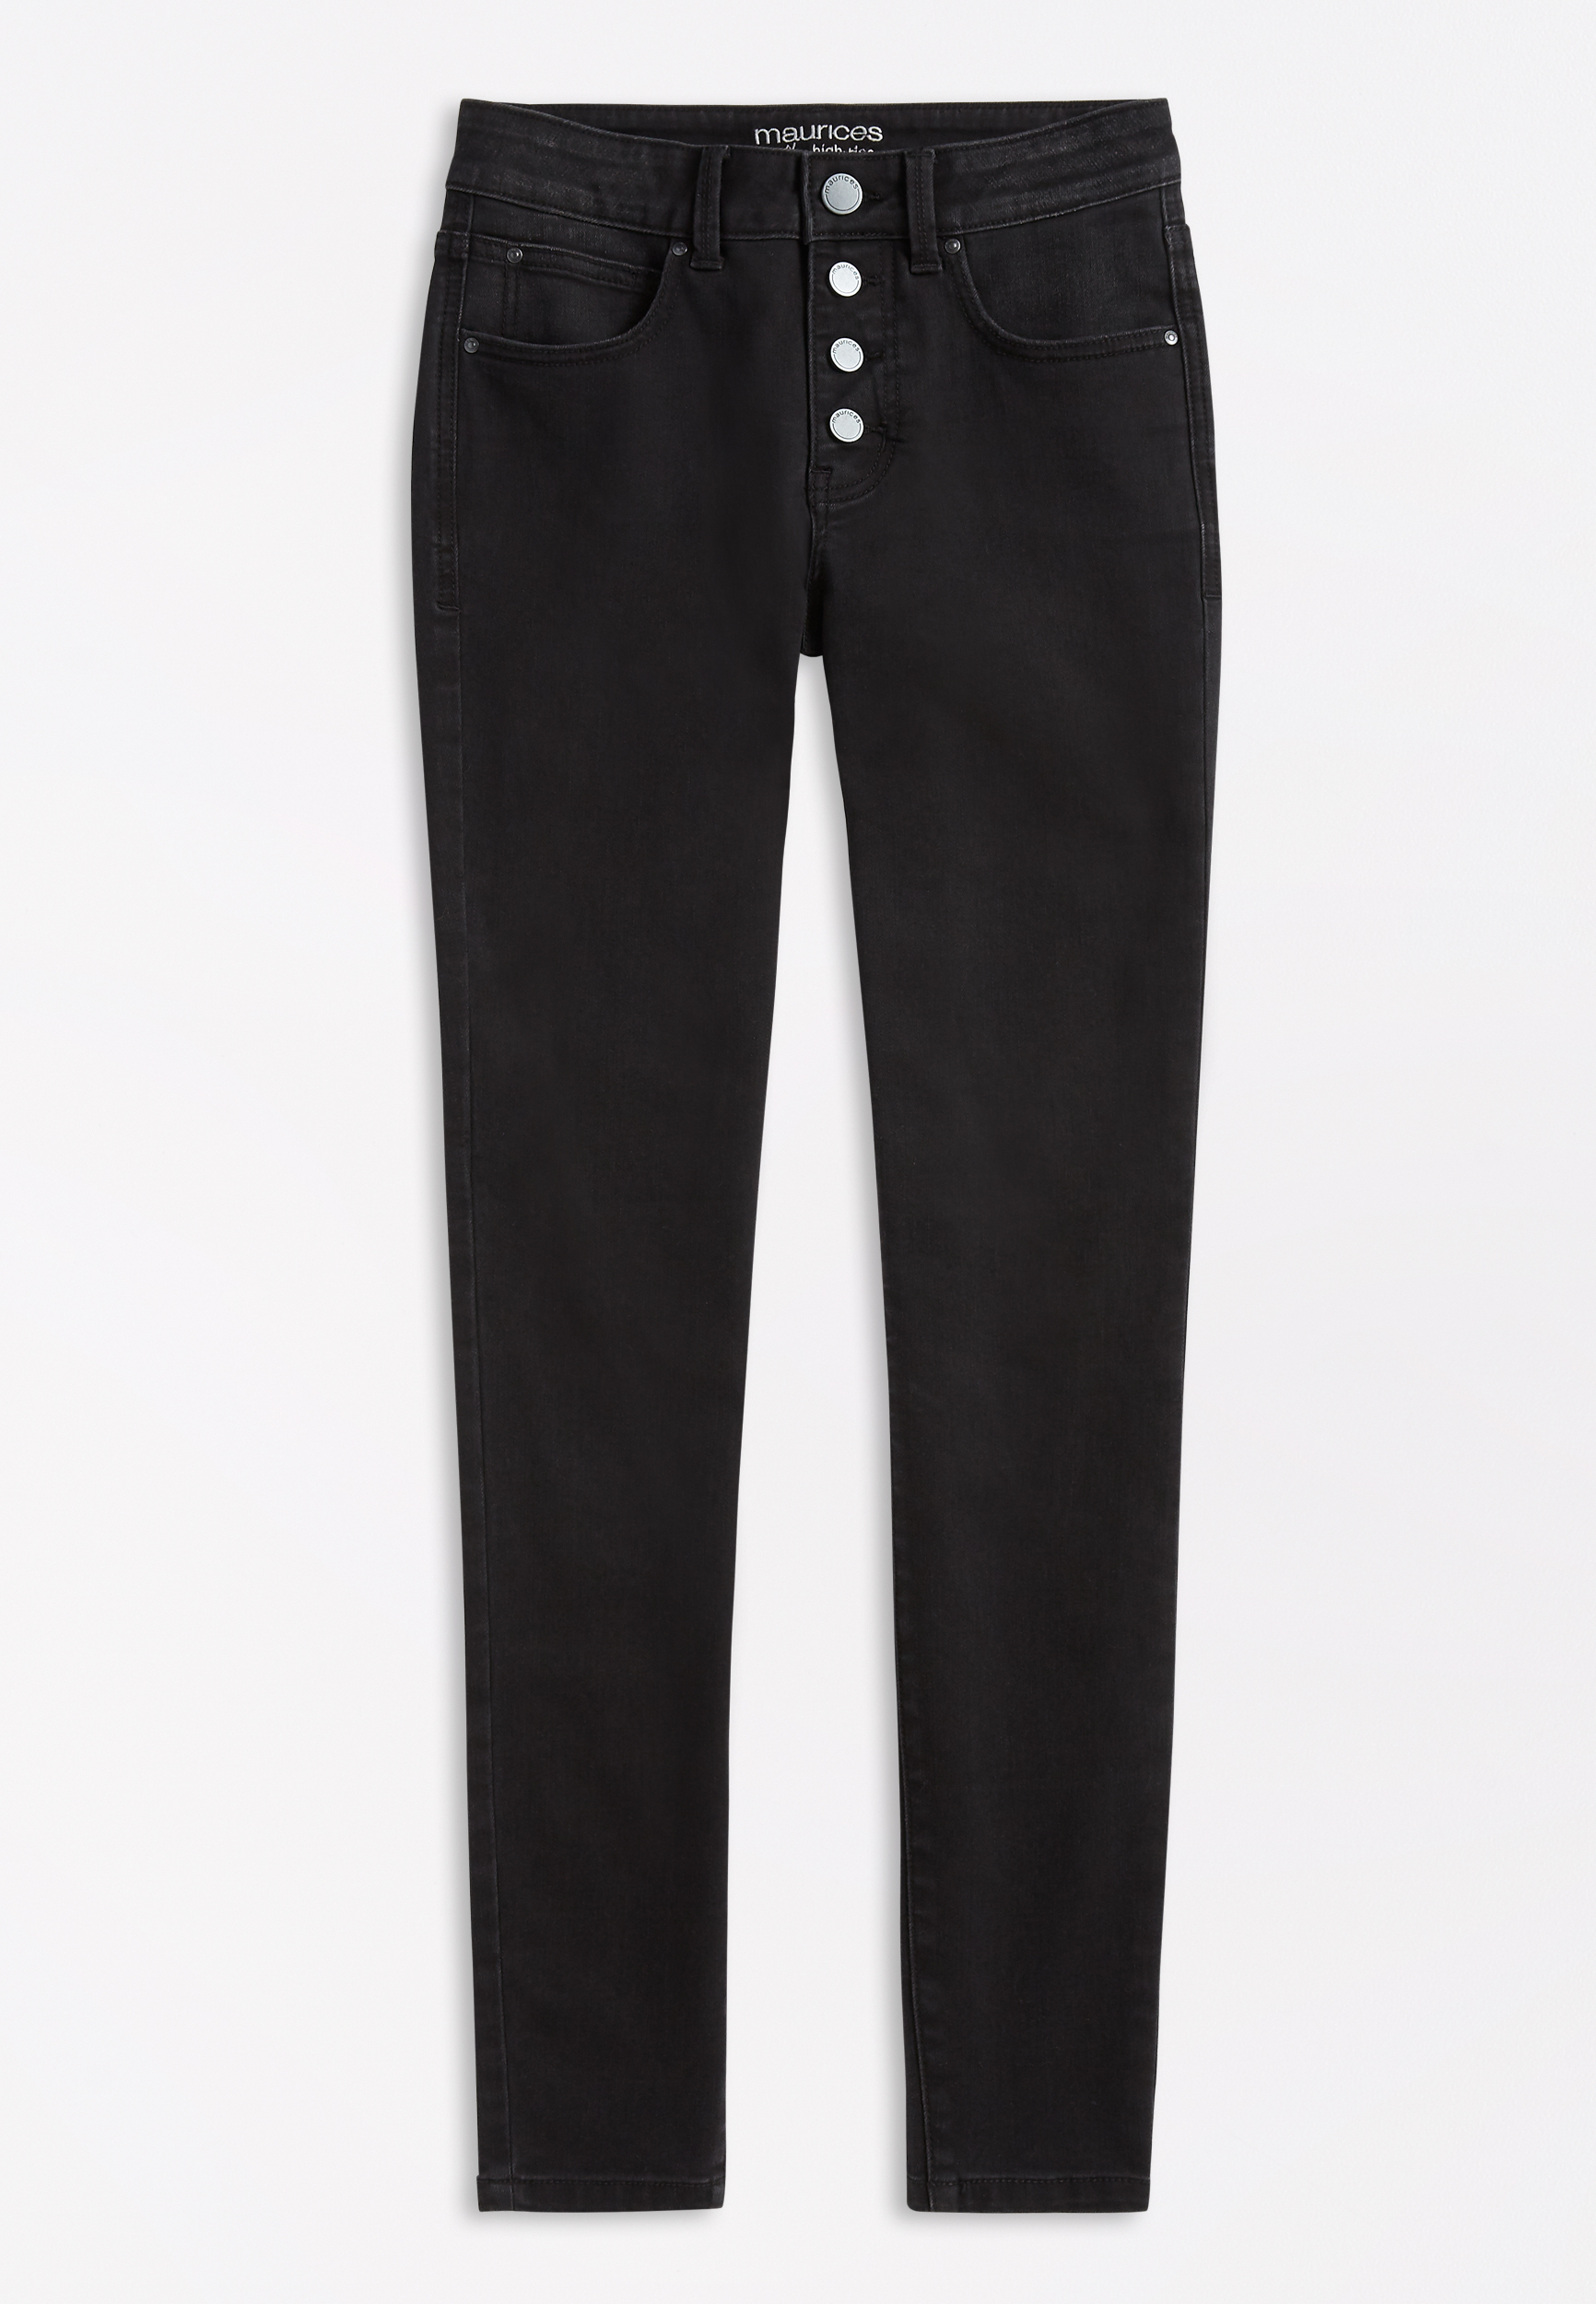 high rise button fly black jeans